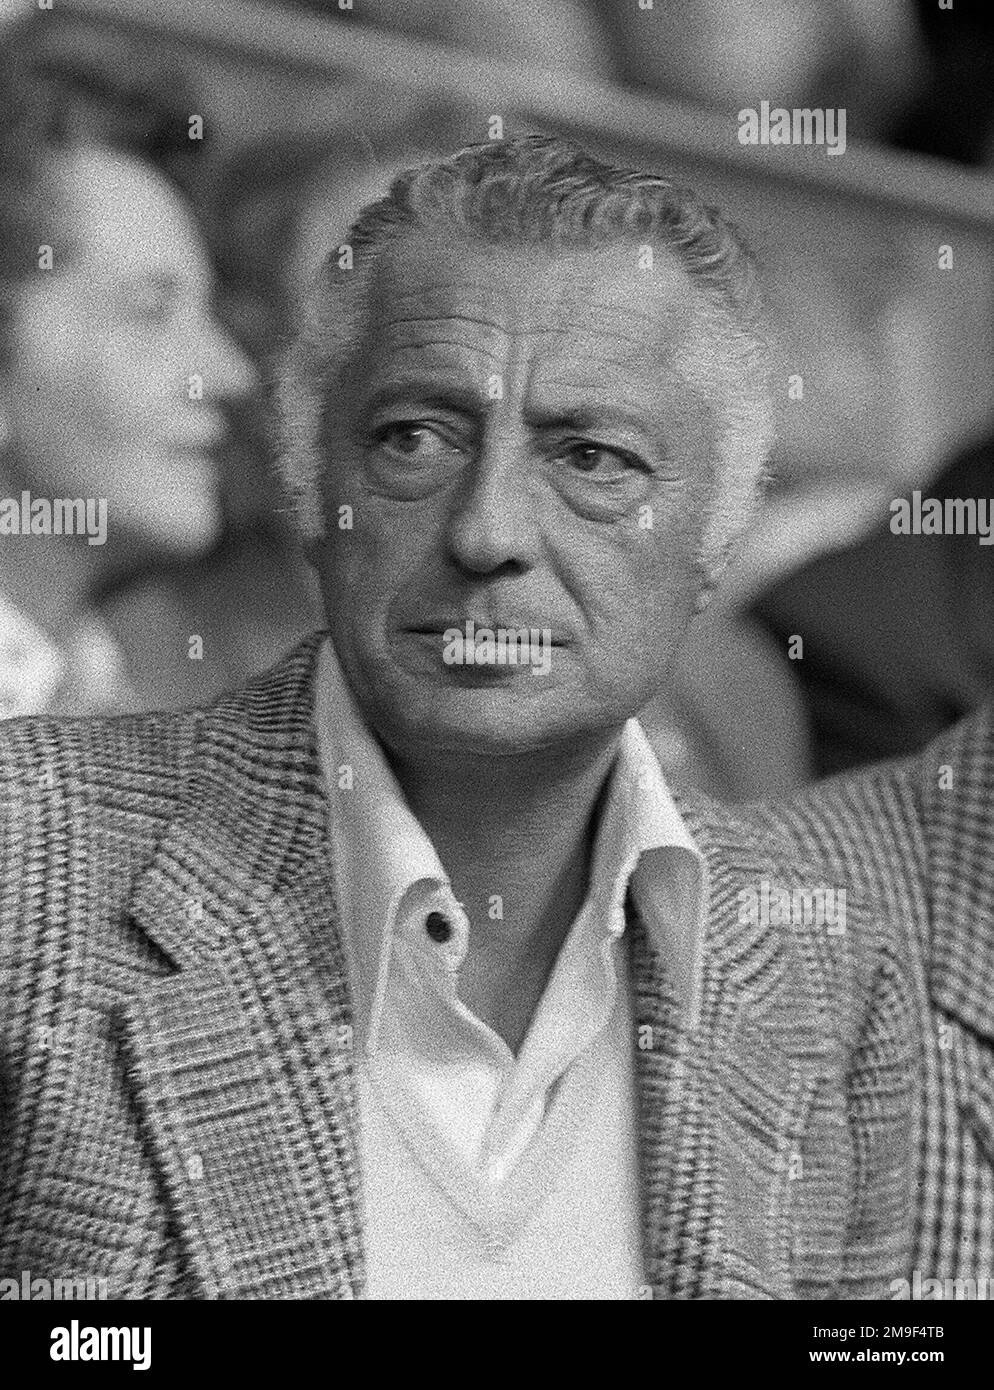 ARCHIVE PHOTO: 20 years ago, on January 24, 2003, Giovanni Agnelli died Giovanni AGNELLI, Italy, heir and manager Management Chairman CEO of the FIAT Group, here as a spectator at the 1972 Summer Olympics in Munich, September 2nd, 1972, B&W photo, portrait, Portrait, ?Sven Simon#Prinzess-Luise-Strasse 41#45479 Muelheim/R uhr #tel. 0208/9413250#fax. 0208/9413260# Postgiro Essen No. 244 293 433 (BLZ 360 100 43)# www.SvenSimon.net. Stock Photo